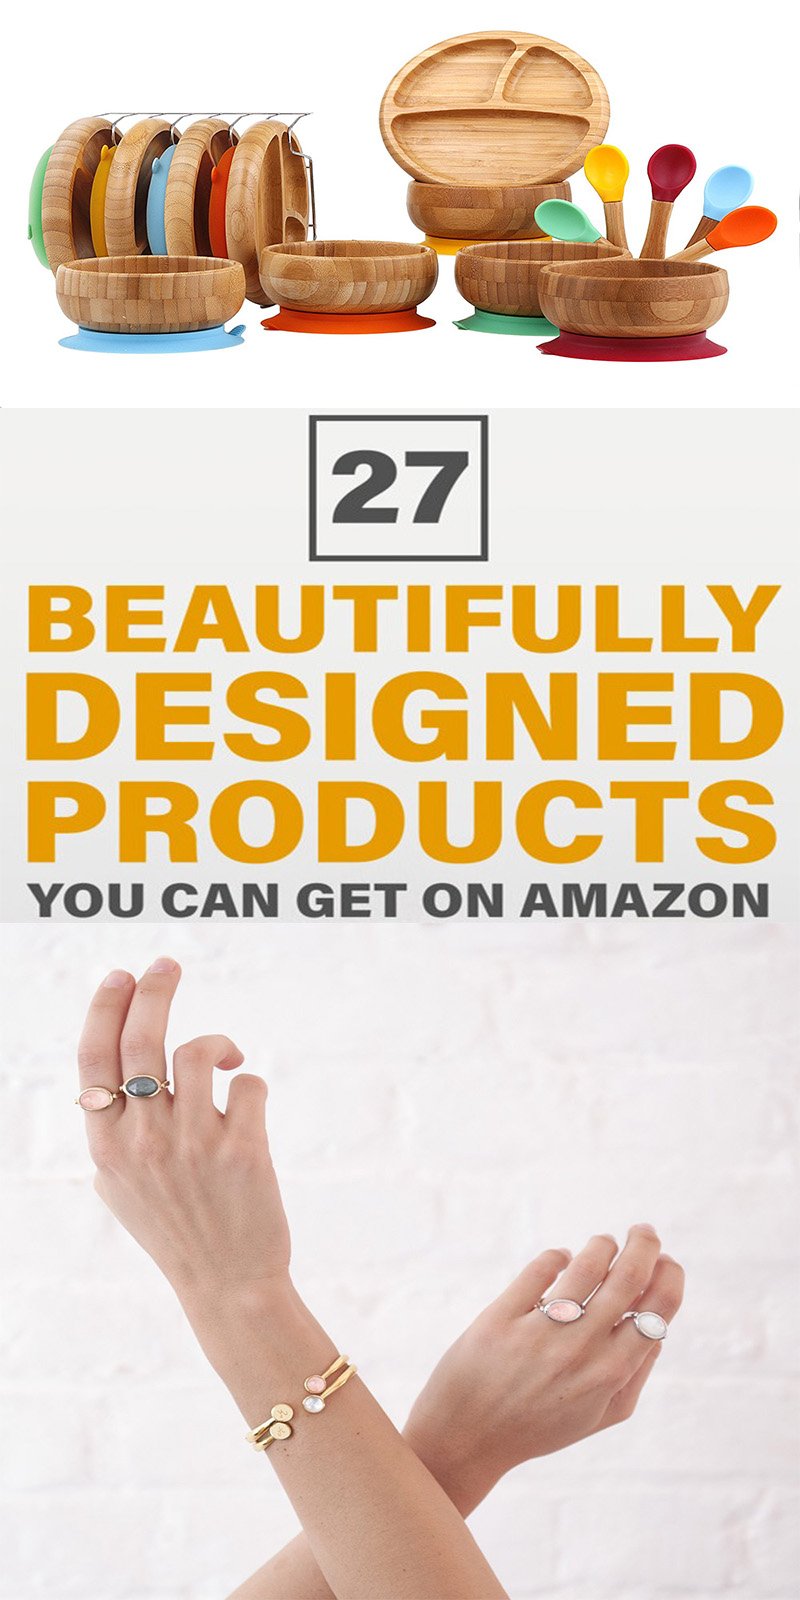 27 Beautifully Designed Products You Can Get On Amazon